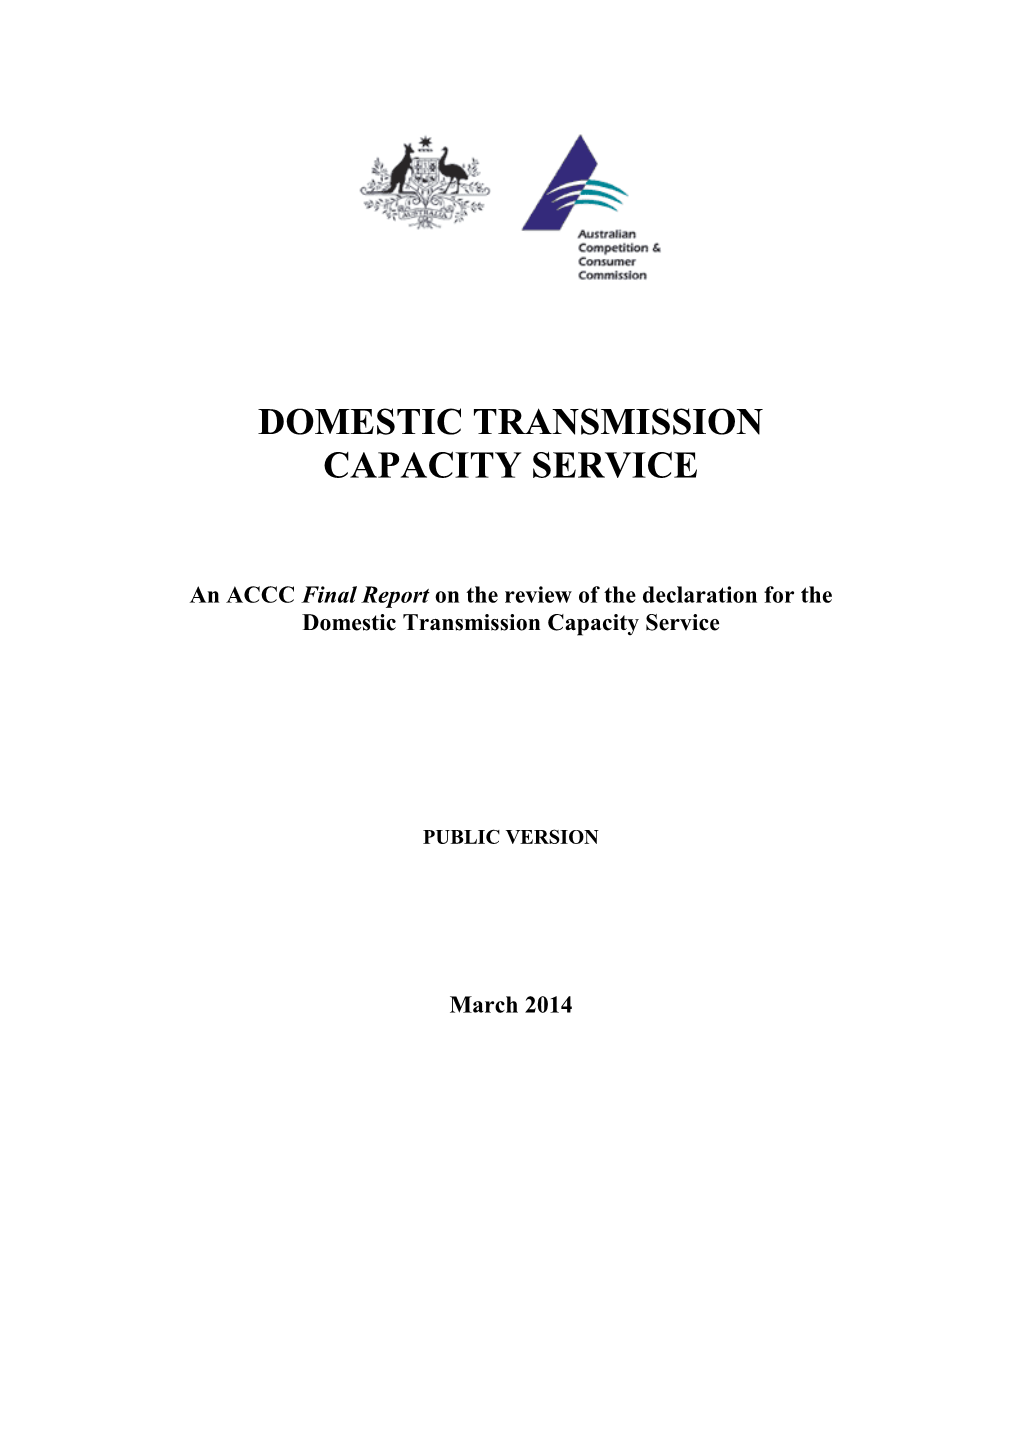 DOMESTIC TRANSMISSION CAPACITY SERVICE - an ACCC Final Report on the Review of the Declaration